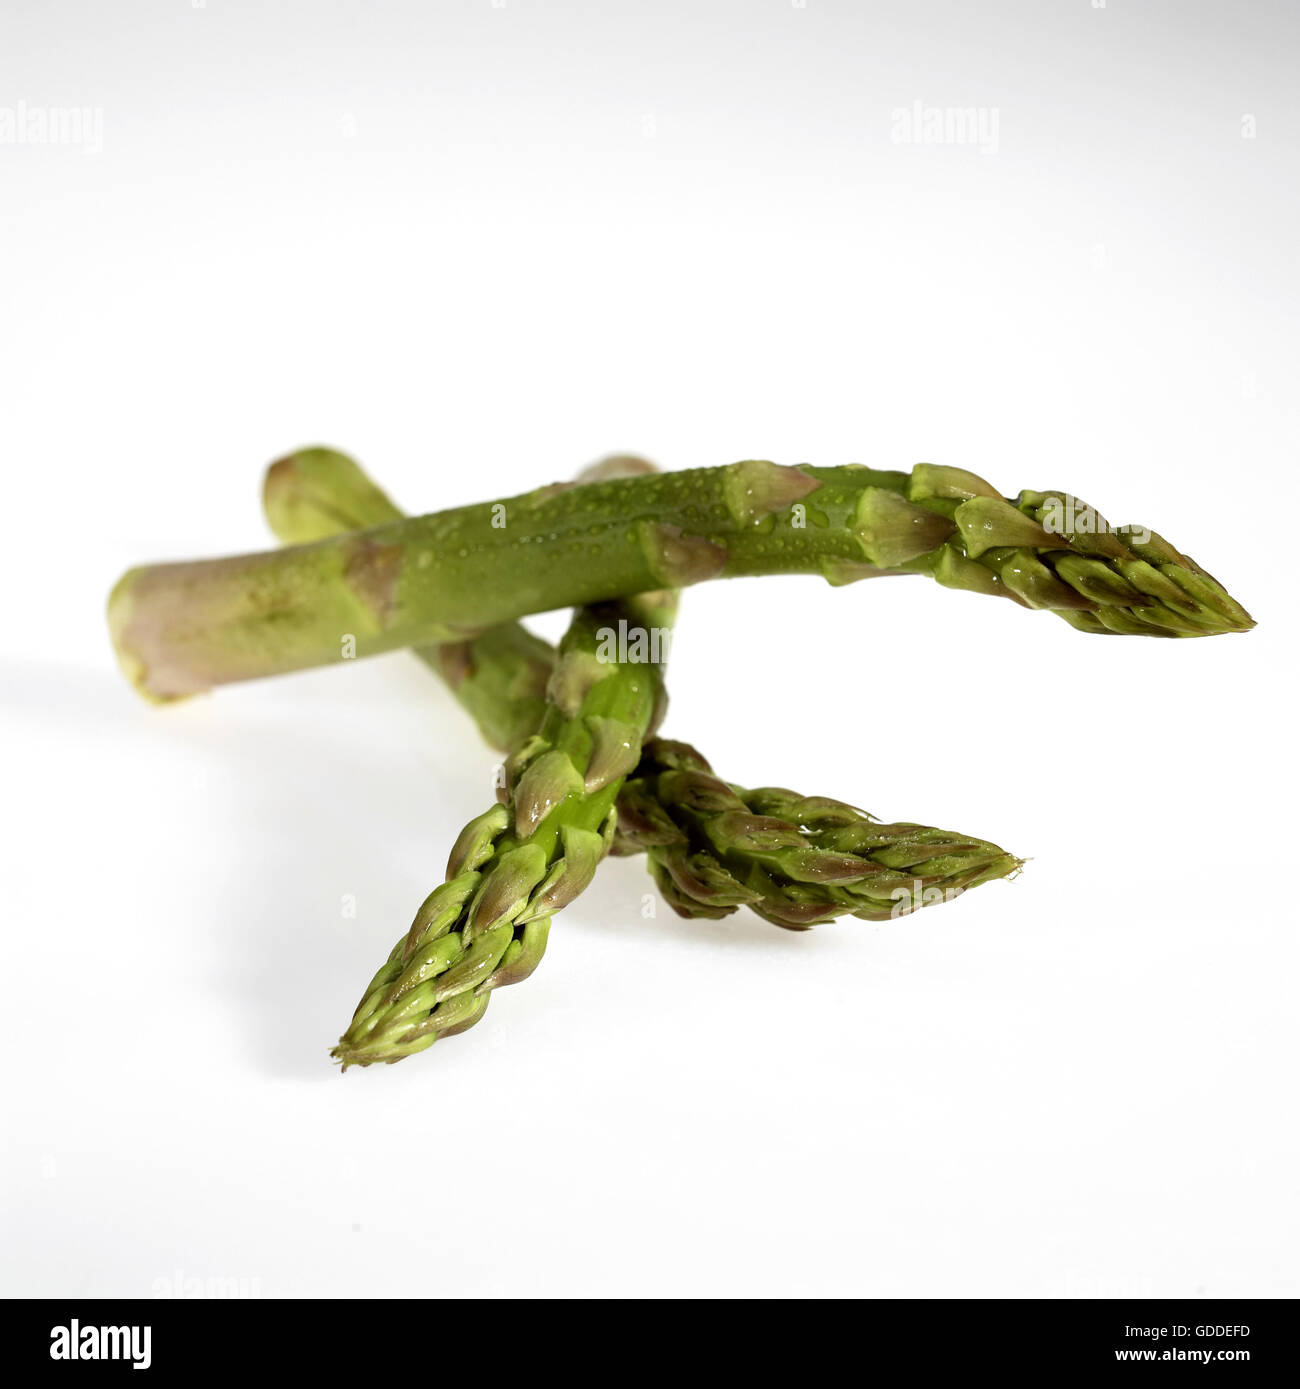 Green Asparagus, asparagus officinalis  against White Background Stock Photo